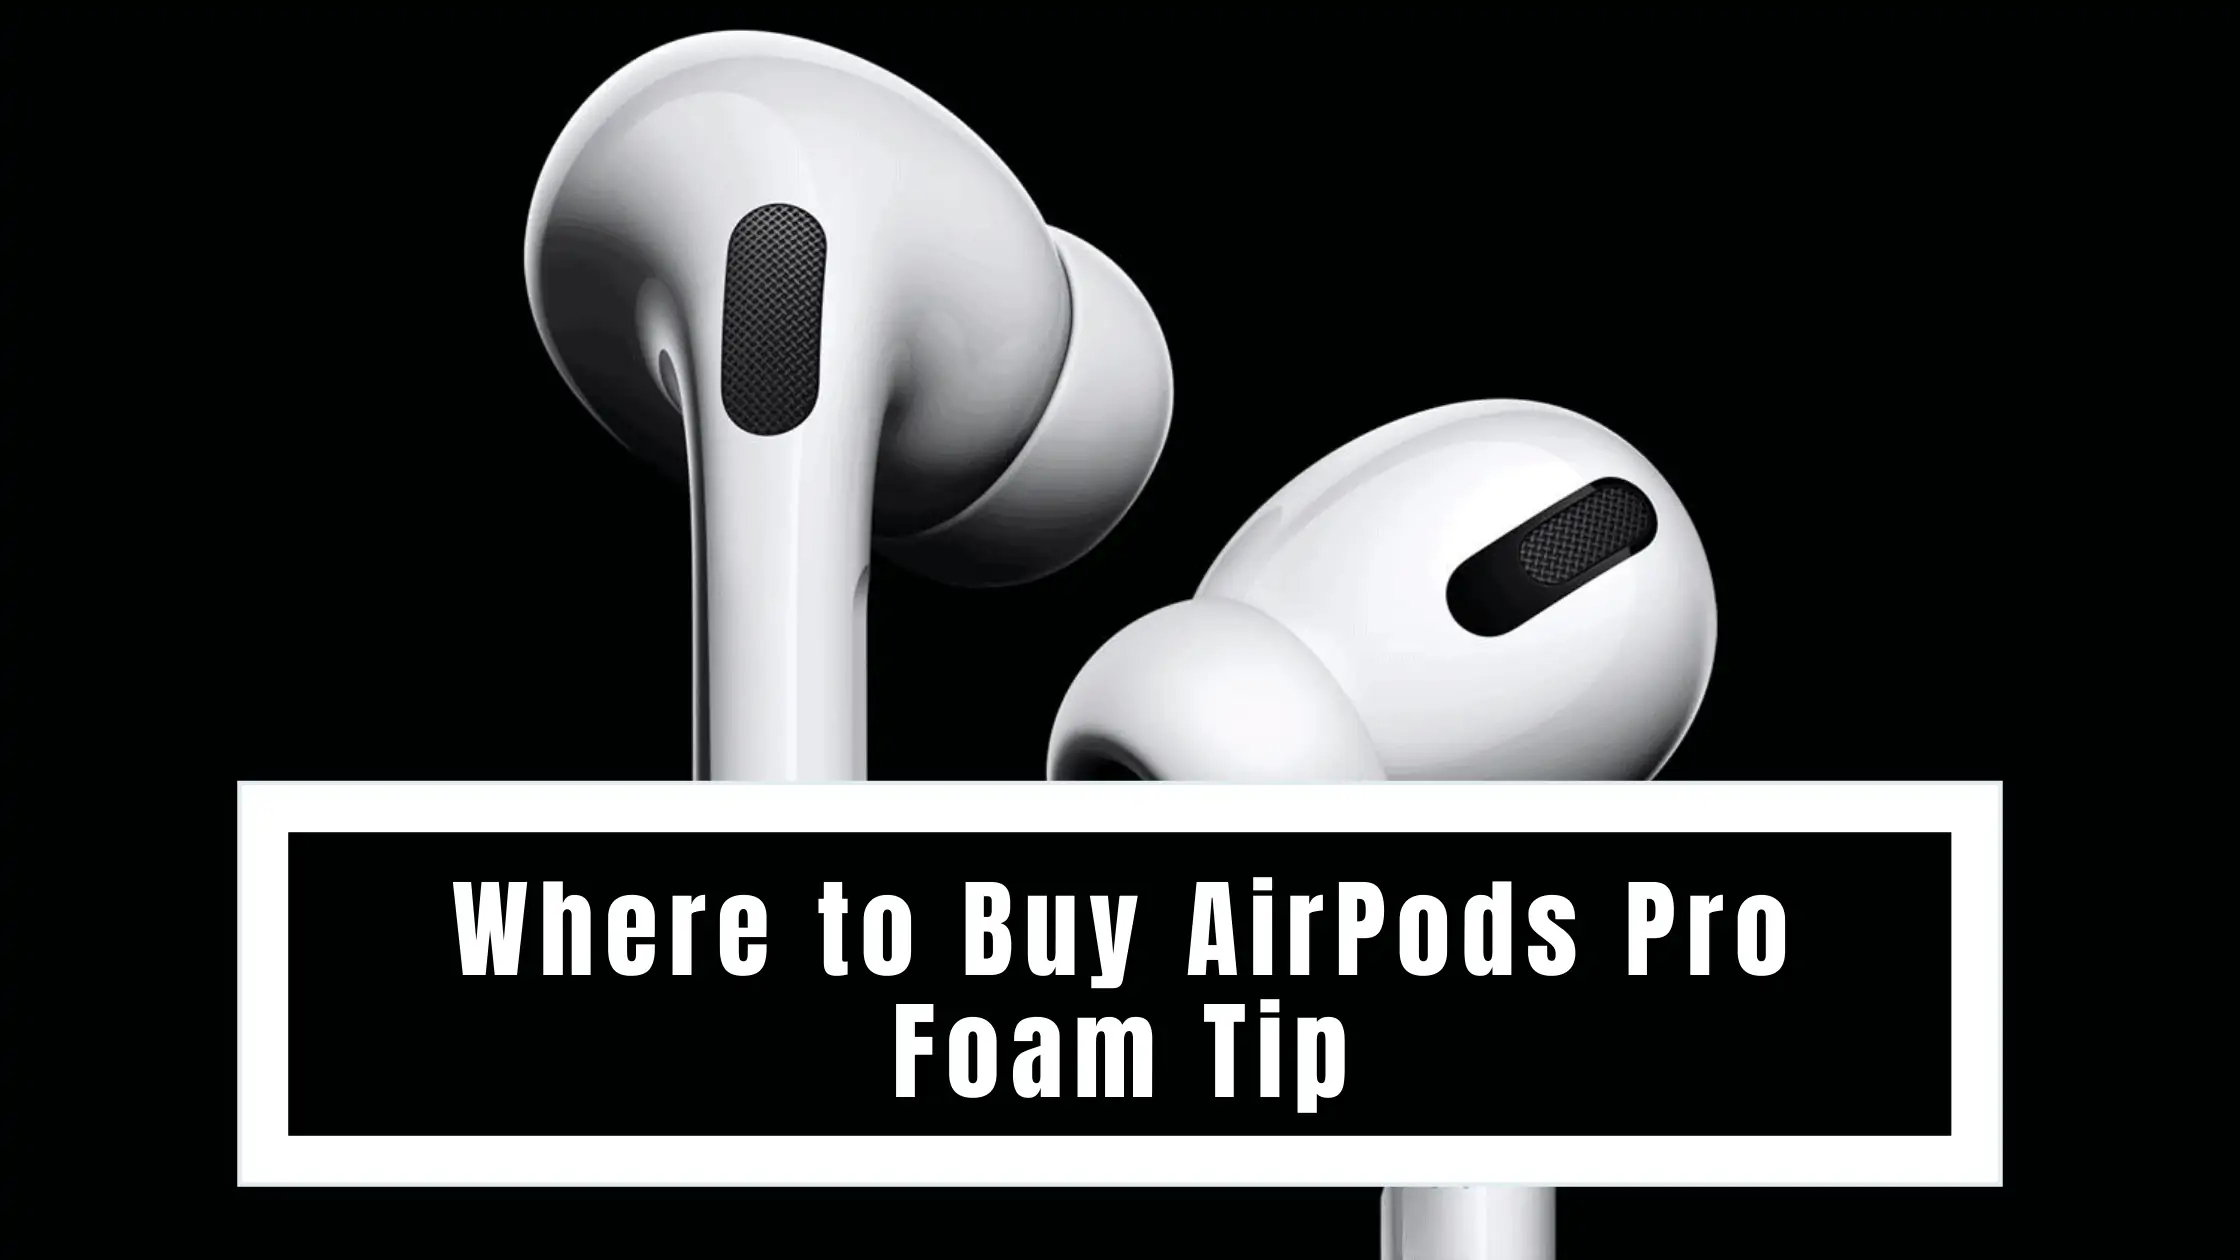 Where to Buy AirPods Pro Foam Tip